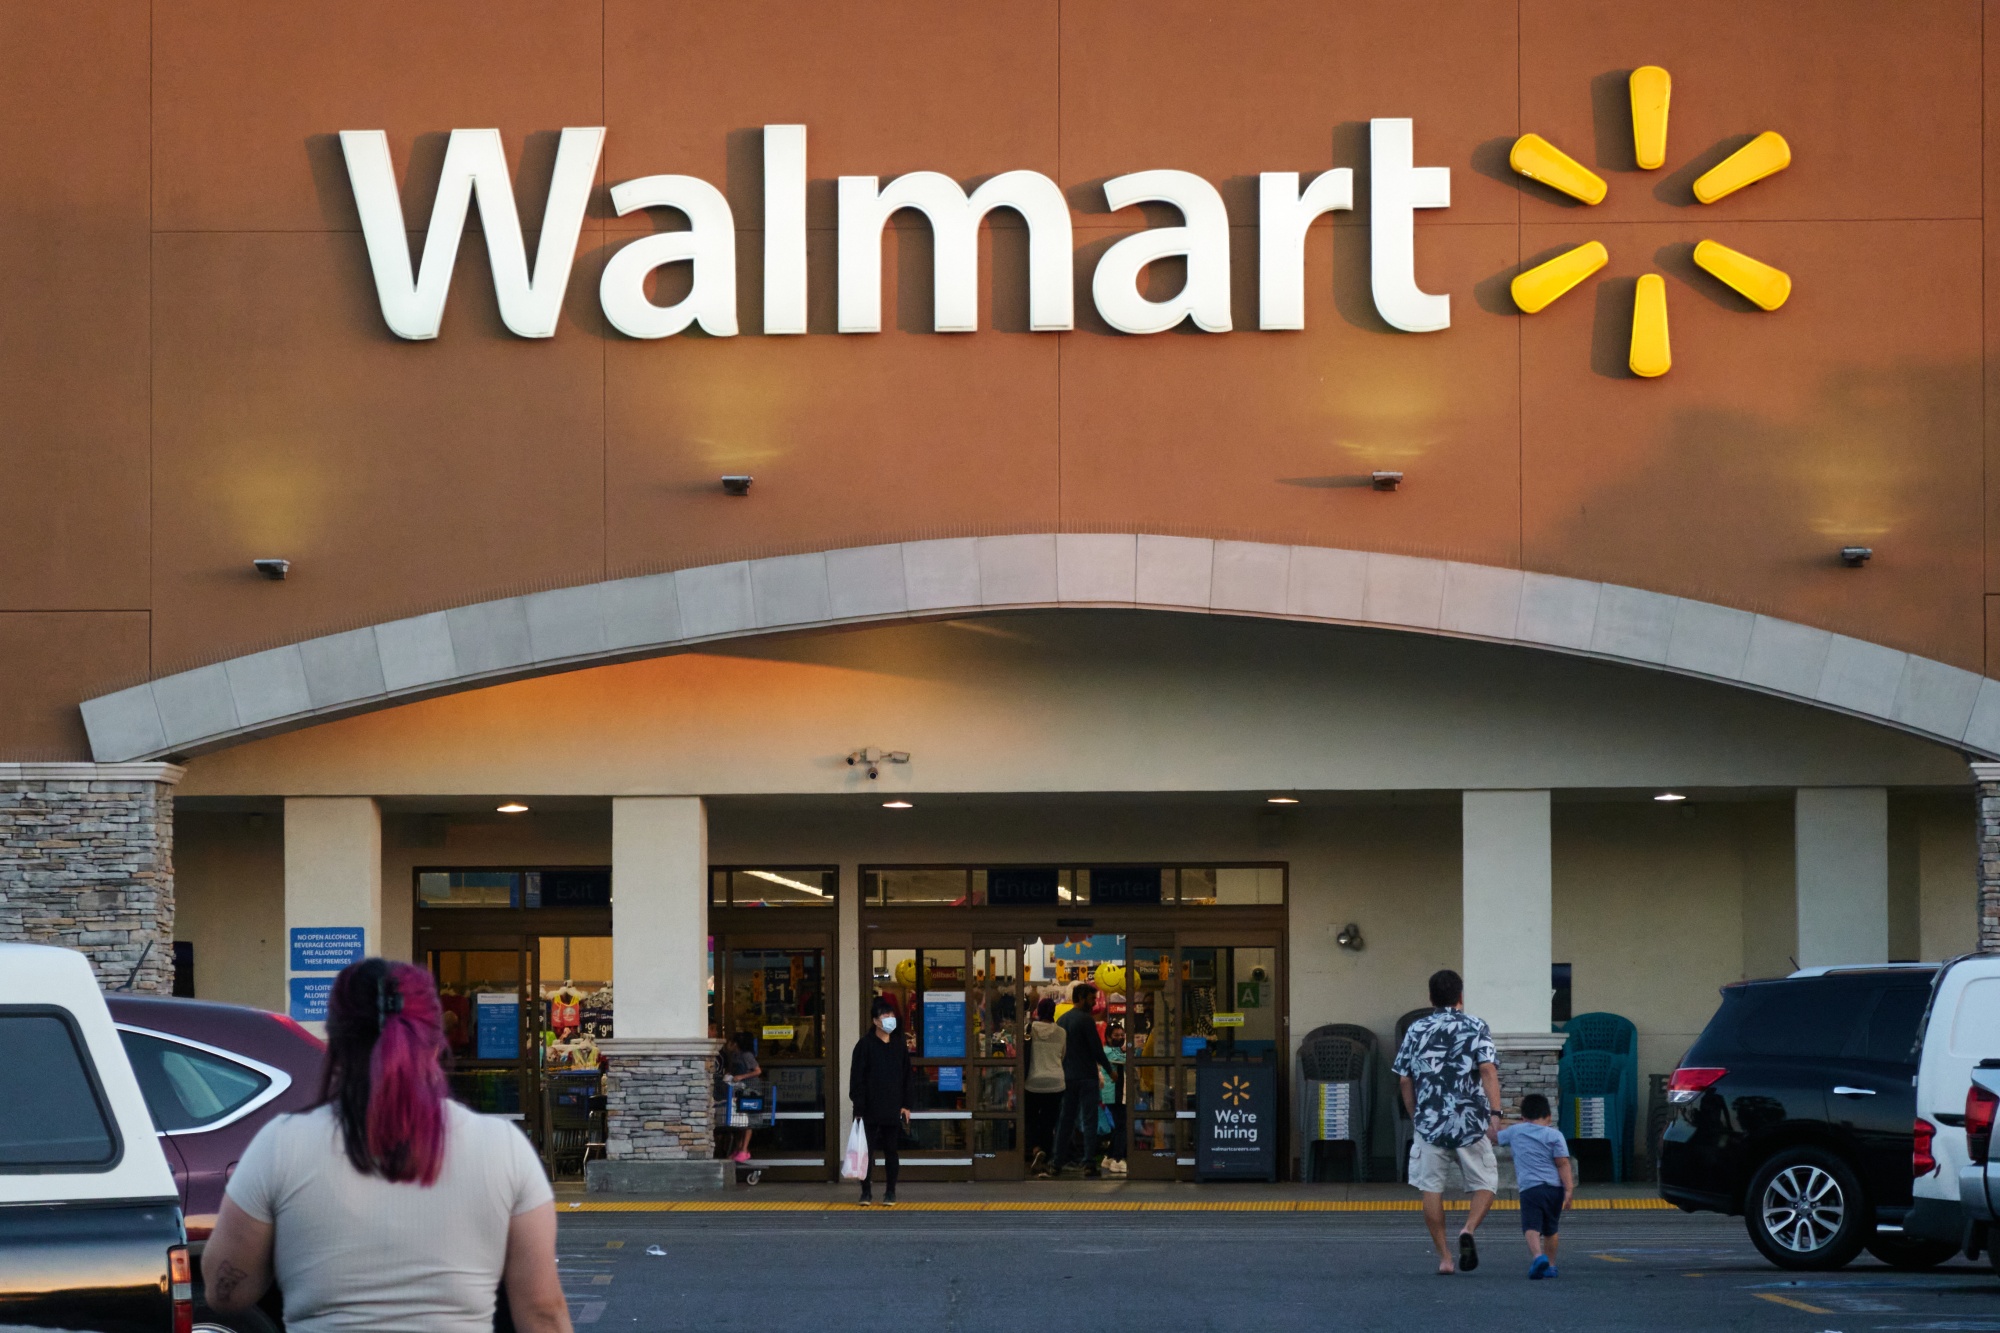 Walmart's Modern Logo Adds Trust And Friendliness To The Major